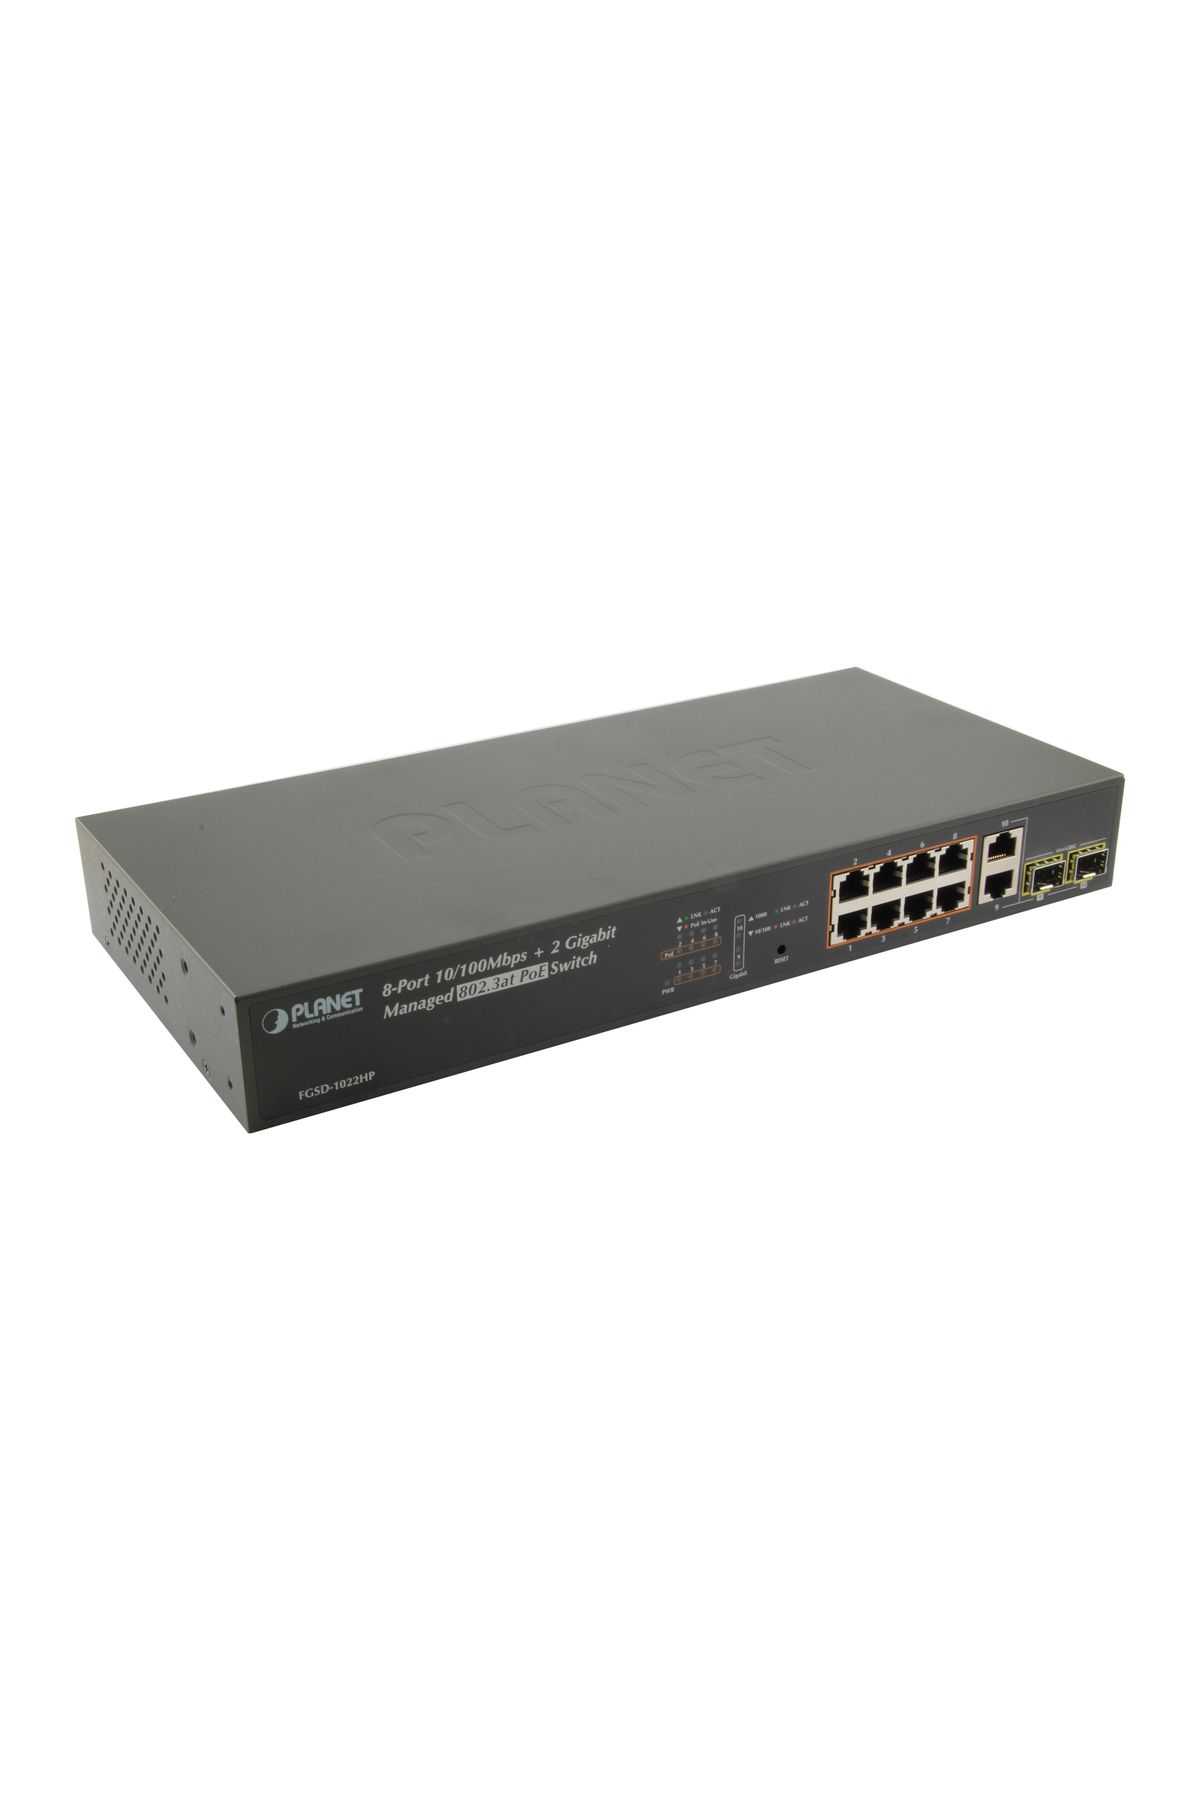 Planet 8-Port 10/100Mbps + 2G TP / SFP Combo Managed 802.3at PoE Switch